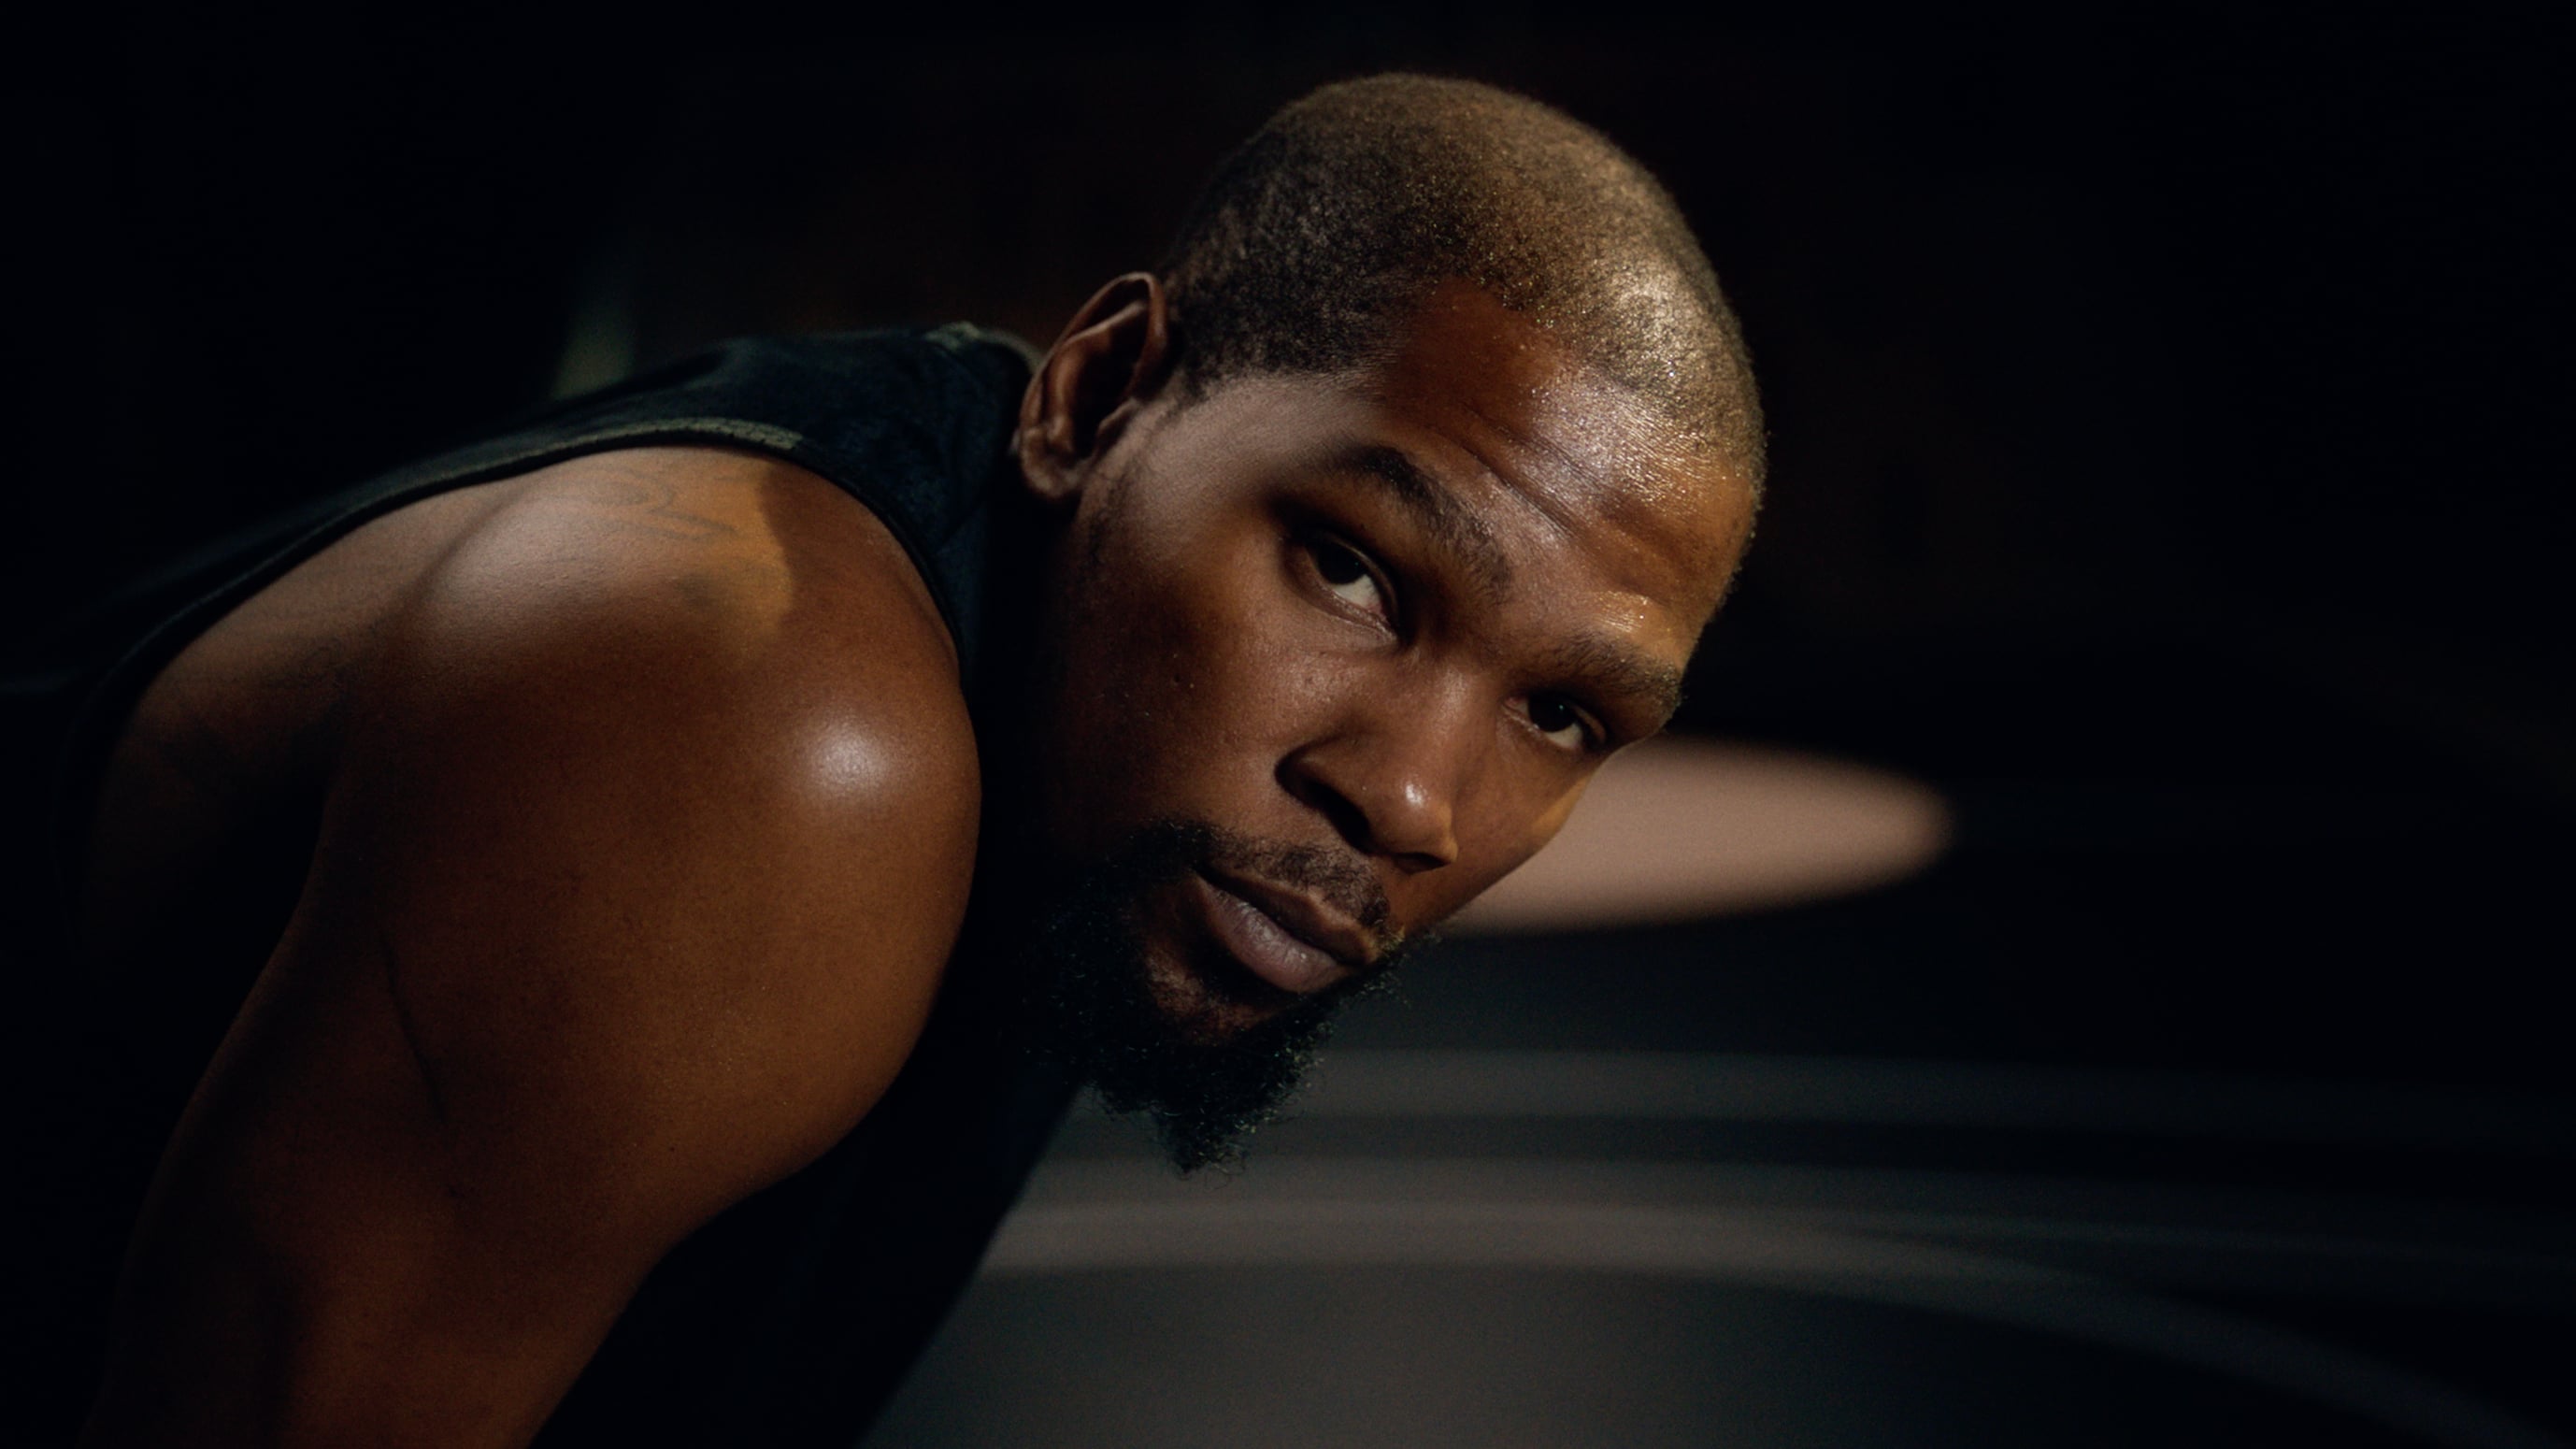 trainer Werkwijze Laag NIKE KEVIN DURANT "TAKE YOUR GAME FURTHER" CAMPAIGN on Vimeo